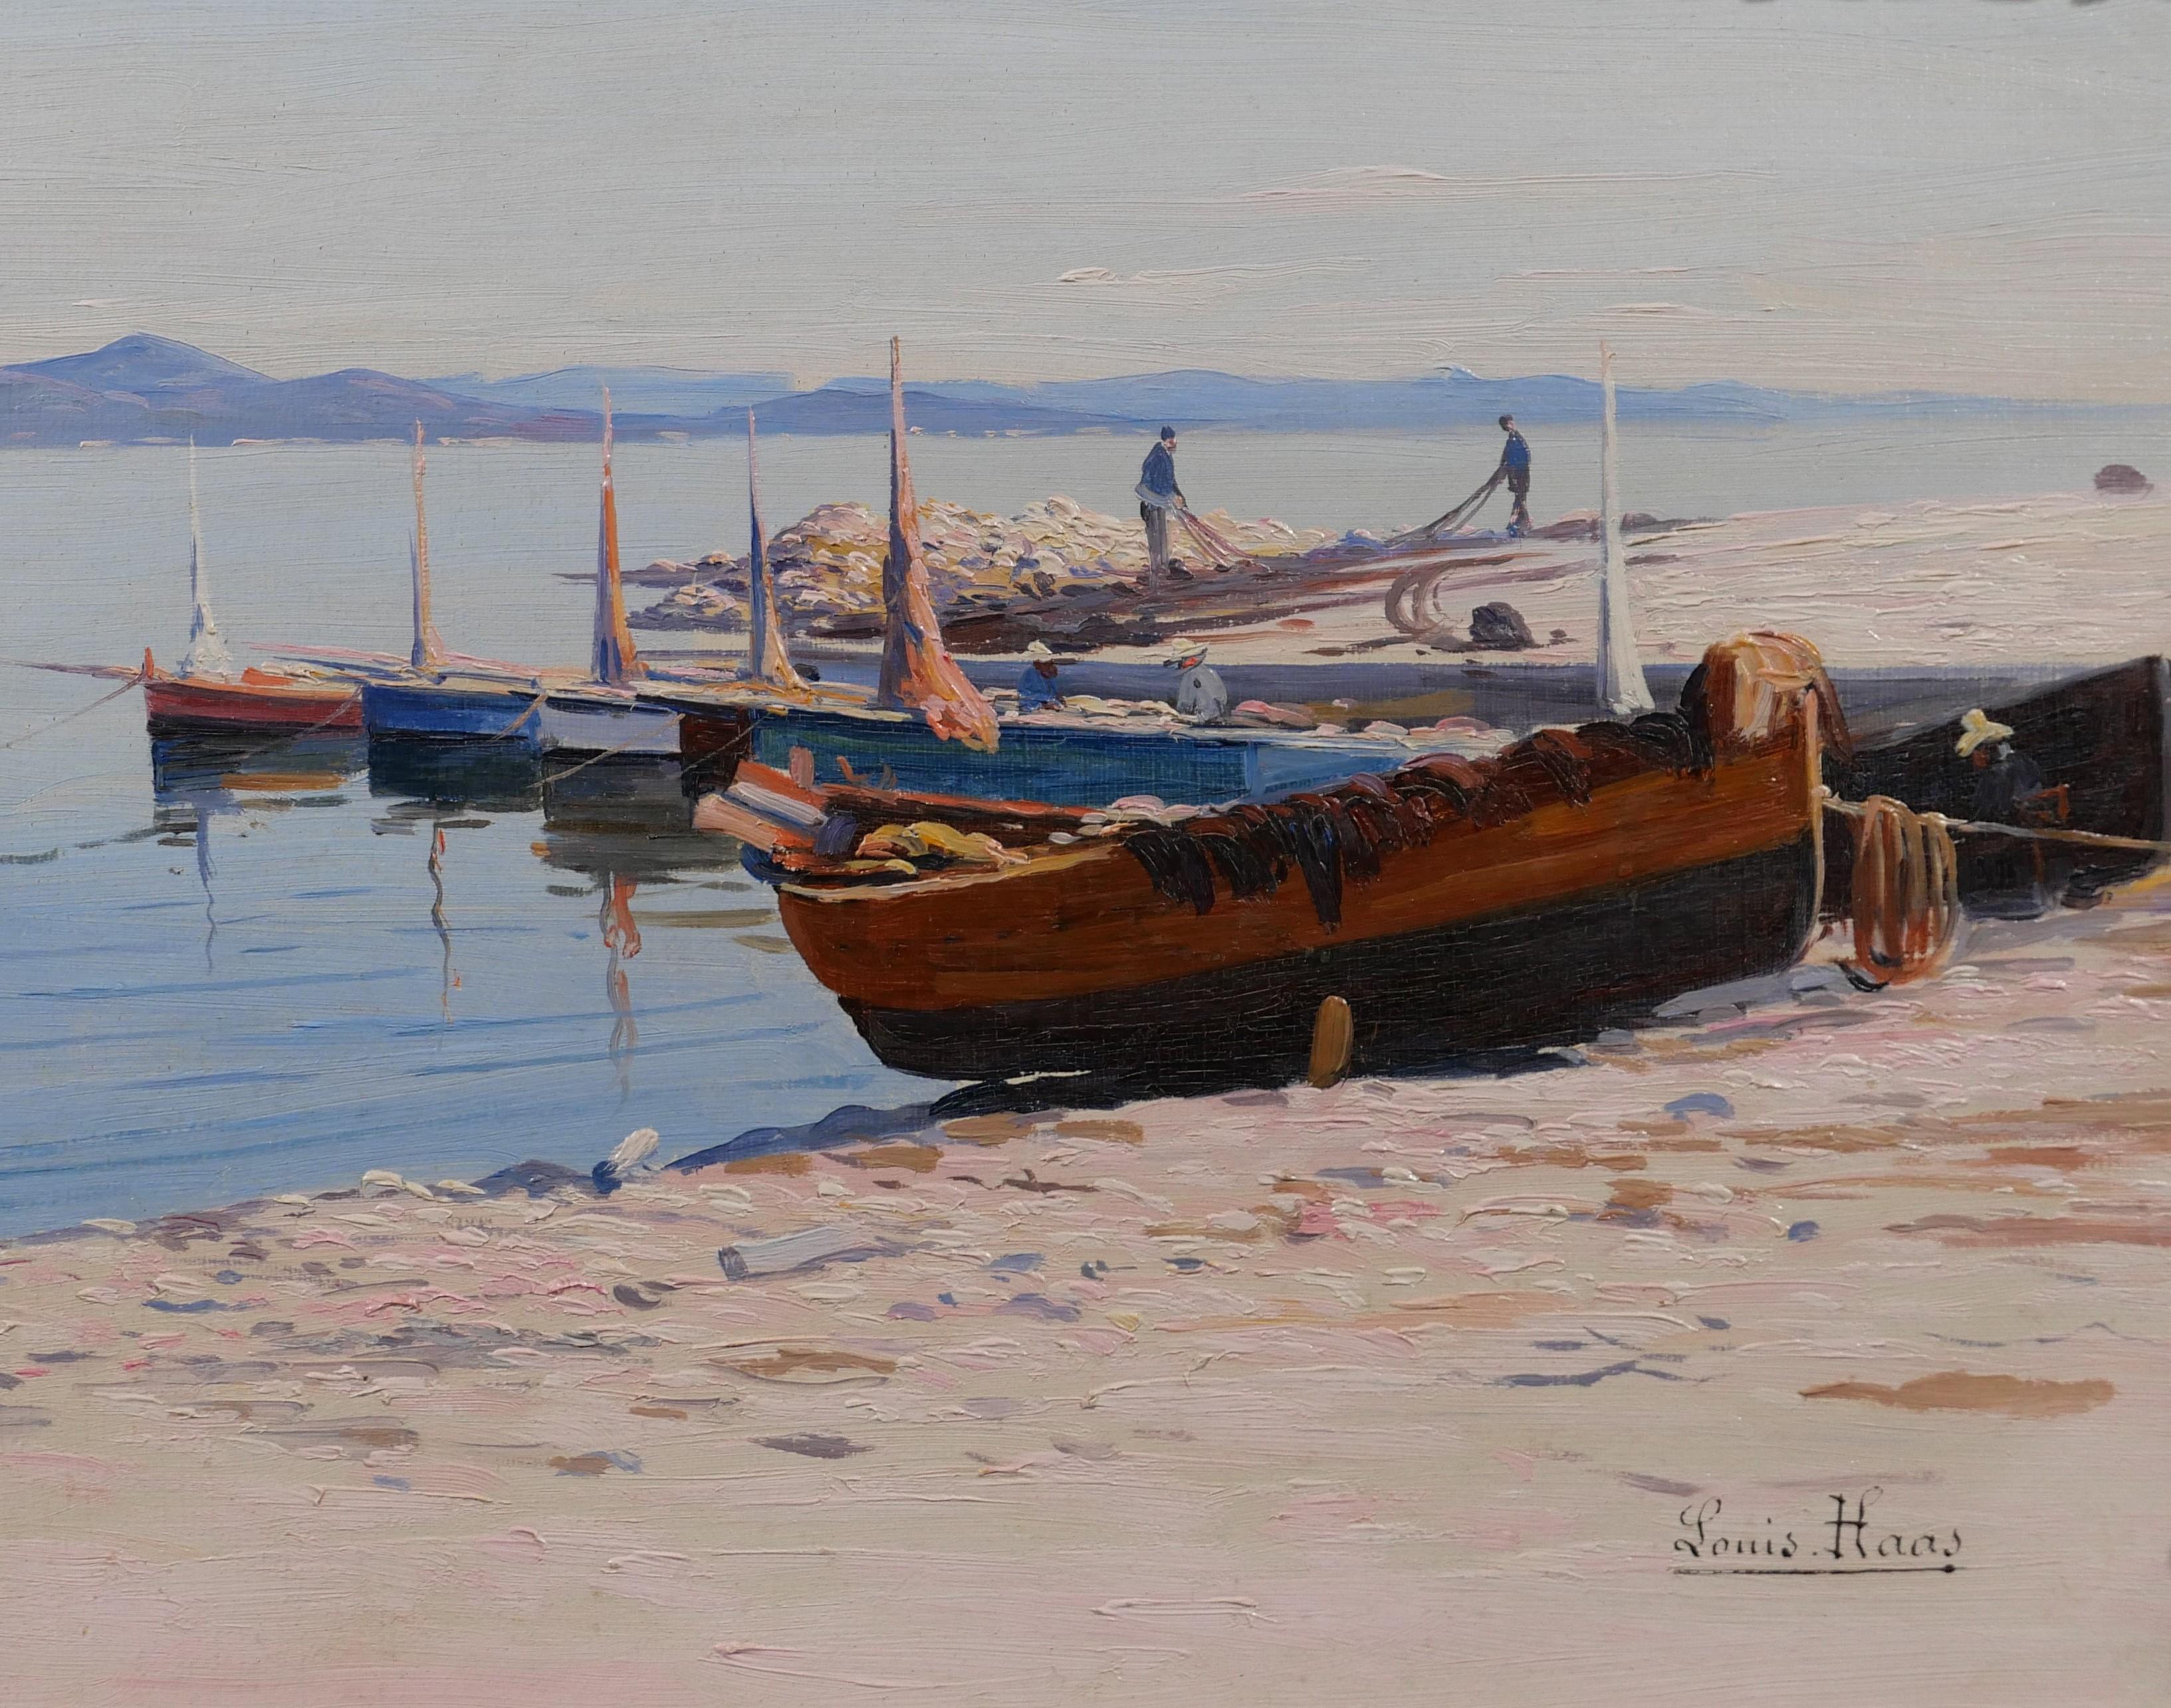 Louis HAAS
Skikda (Algeria), 1870 - Bandol, 1923
Saint-Tropez, boat on the point (France)
Signed
Painting: 24.5 x 41.5 cm (9.6 x 16.3 inches)
19th century frame: 33 x 50 cm (13 x 19.7 inches)
Very good condition
Titled on the back : 